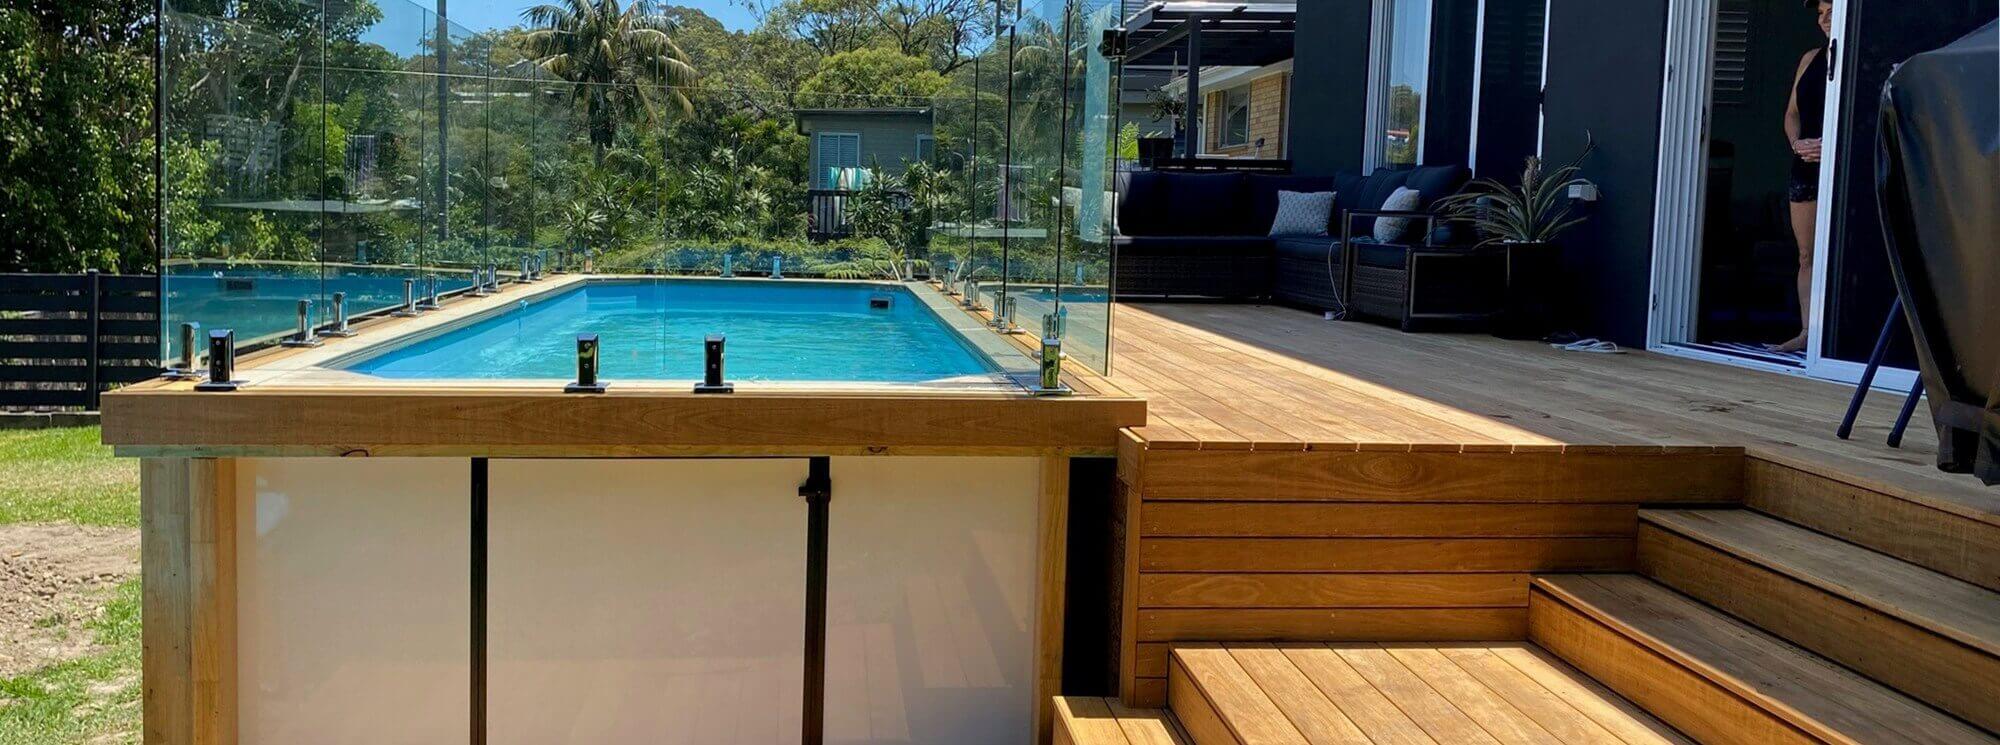 Decking adds cost to above ground pool price